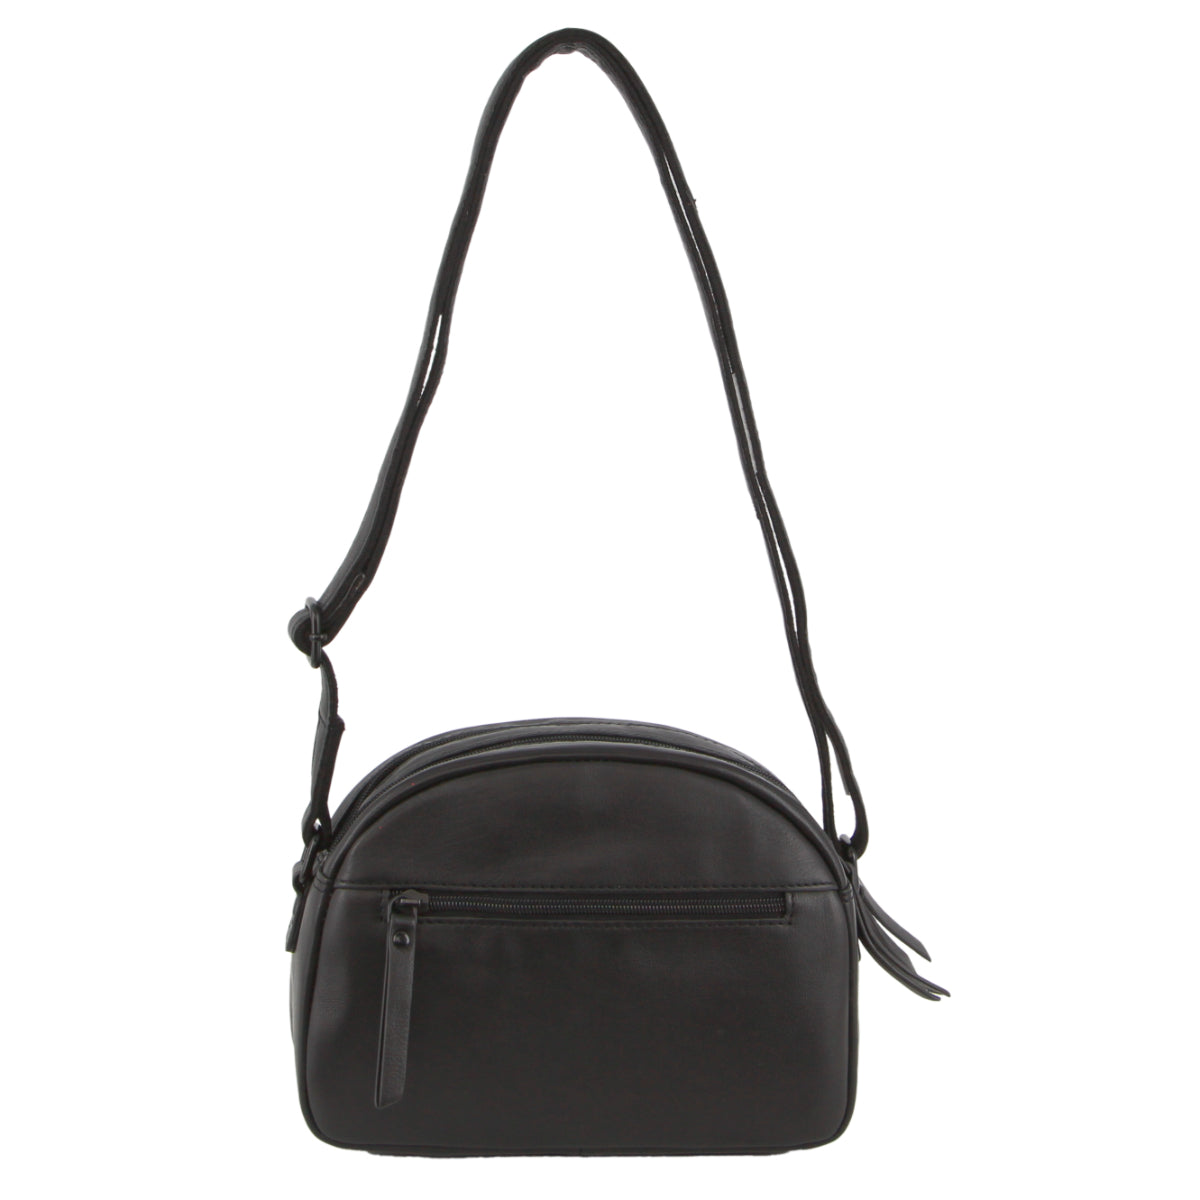 Milleni - NL3869 Small rounded leather sidebag - Black-1